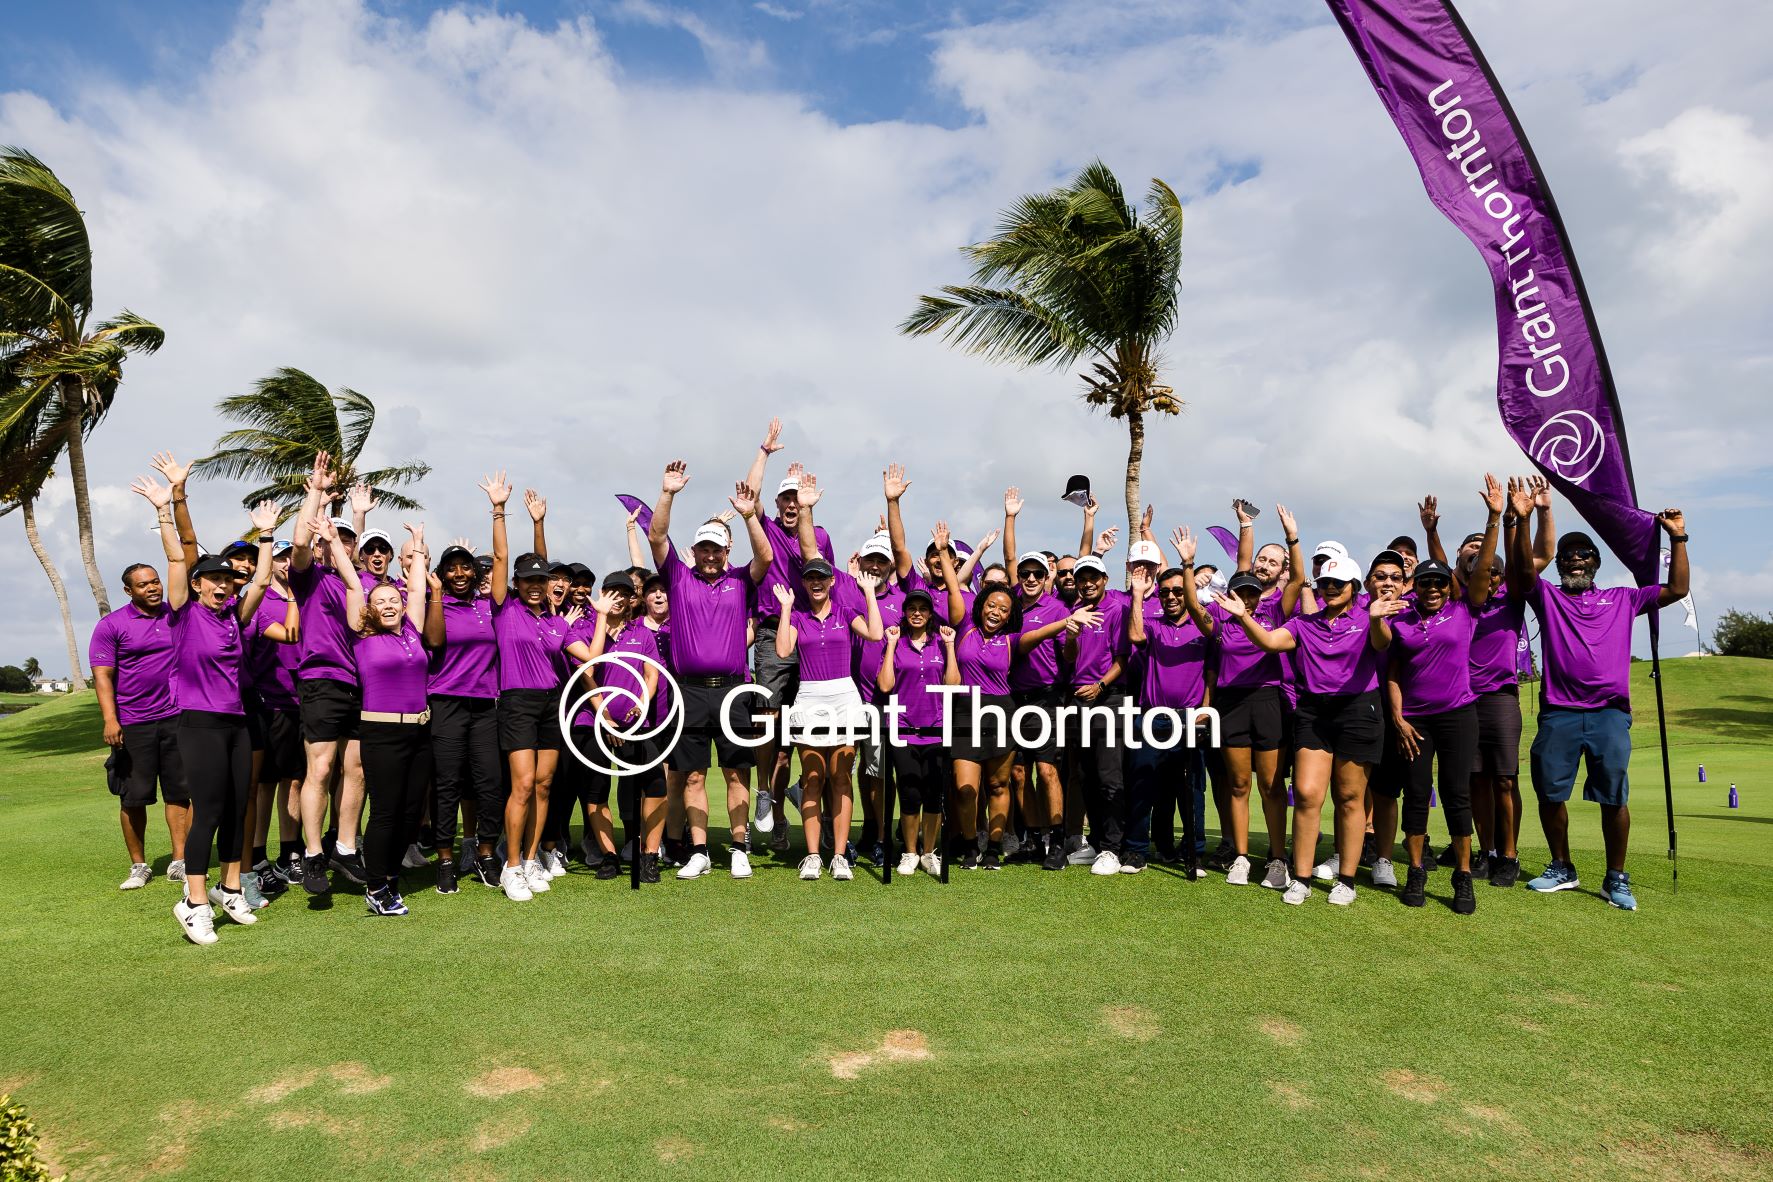 Grant Thornton Cayman Islands raises over US20,000 for charities at